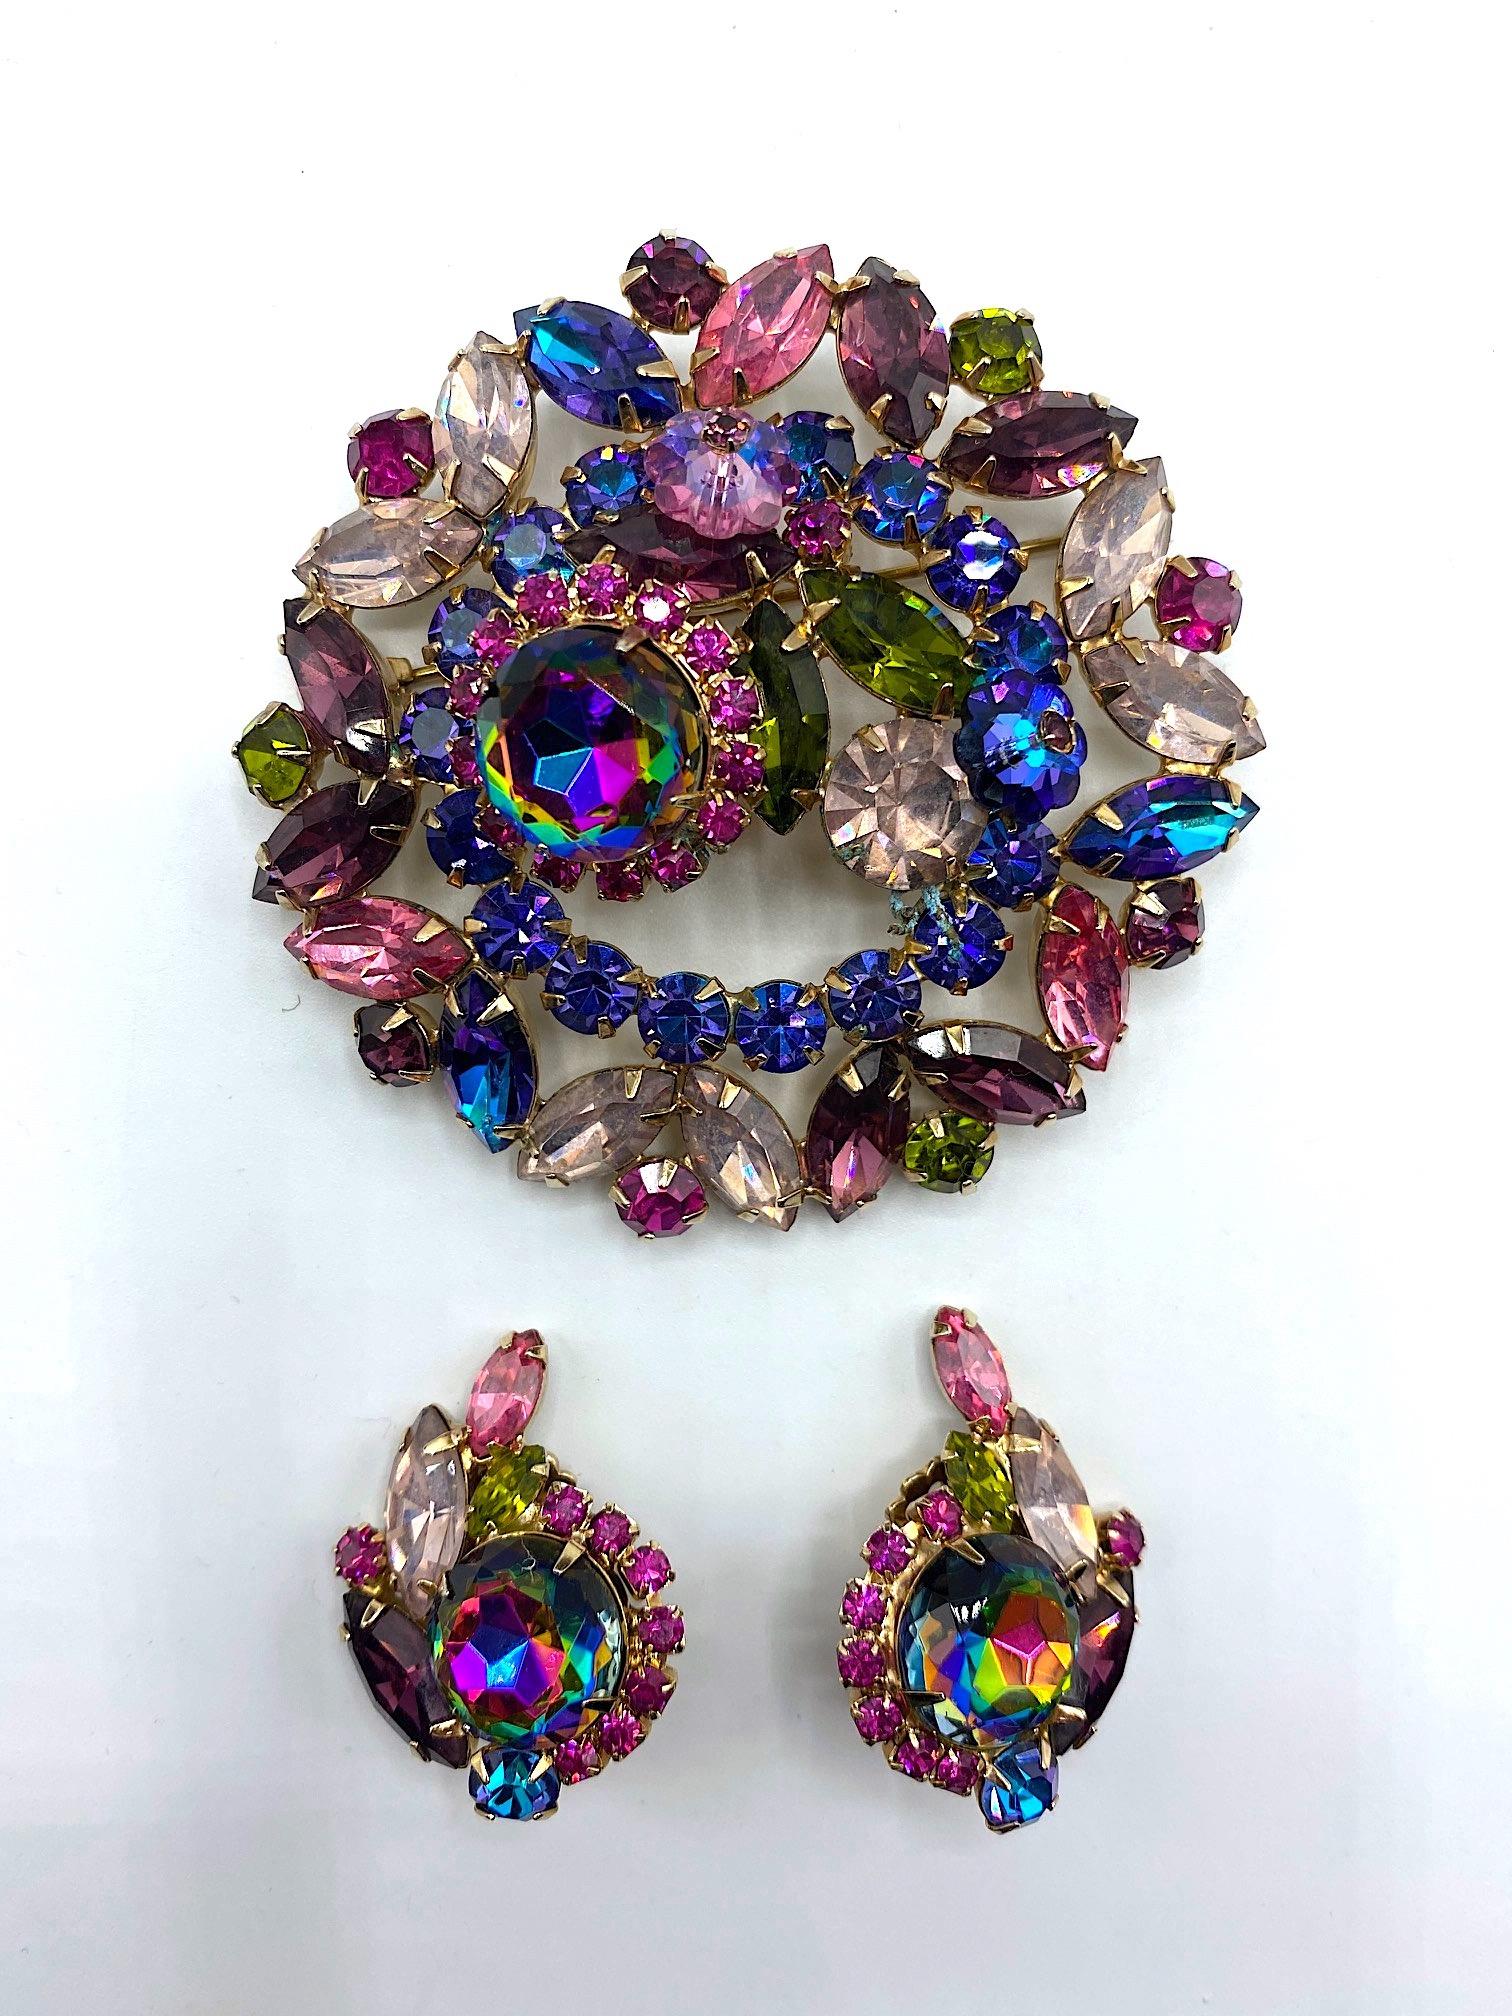 A stunning and impressive 1950s brooch and earring set by famous American designer of the early and mid 20th century Hattie Carnegie. The brooch is large 2.75 inches in diameter, lightly domed and .88 of an inch deep at the highest point. Each clip